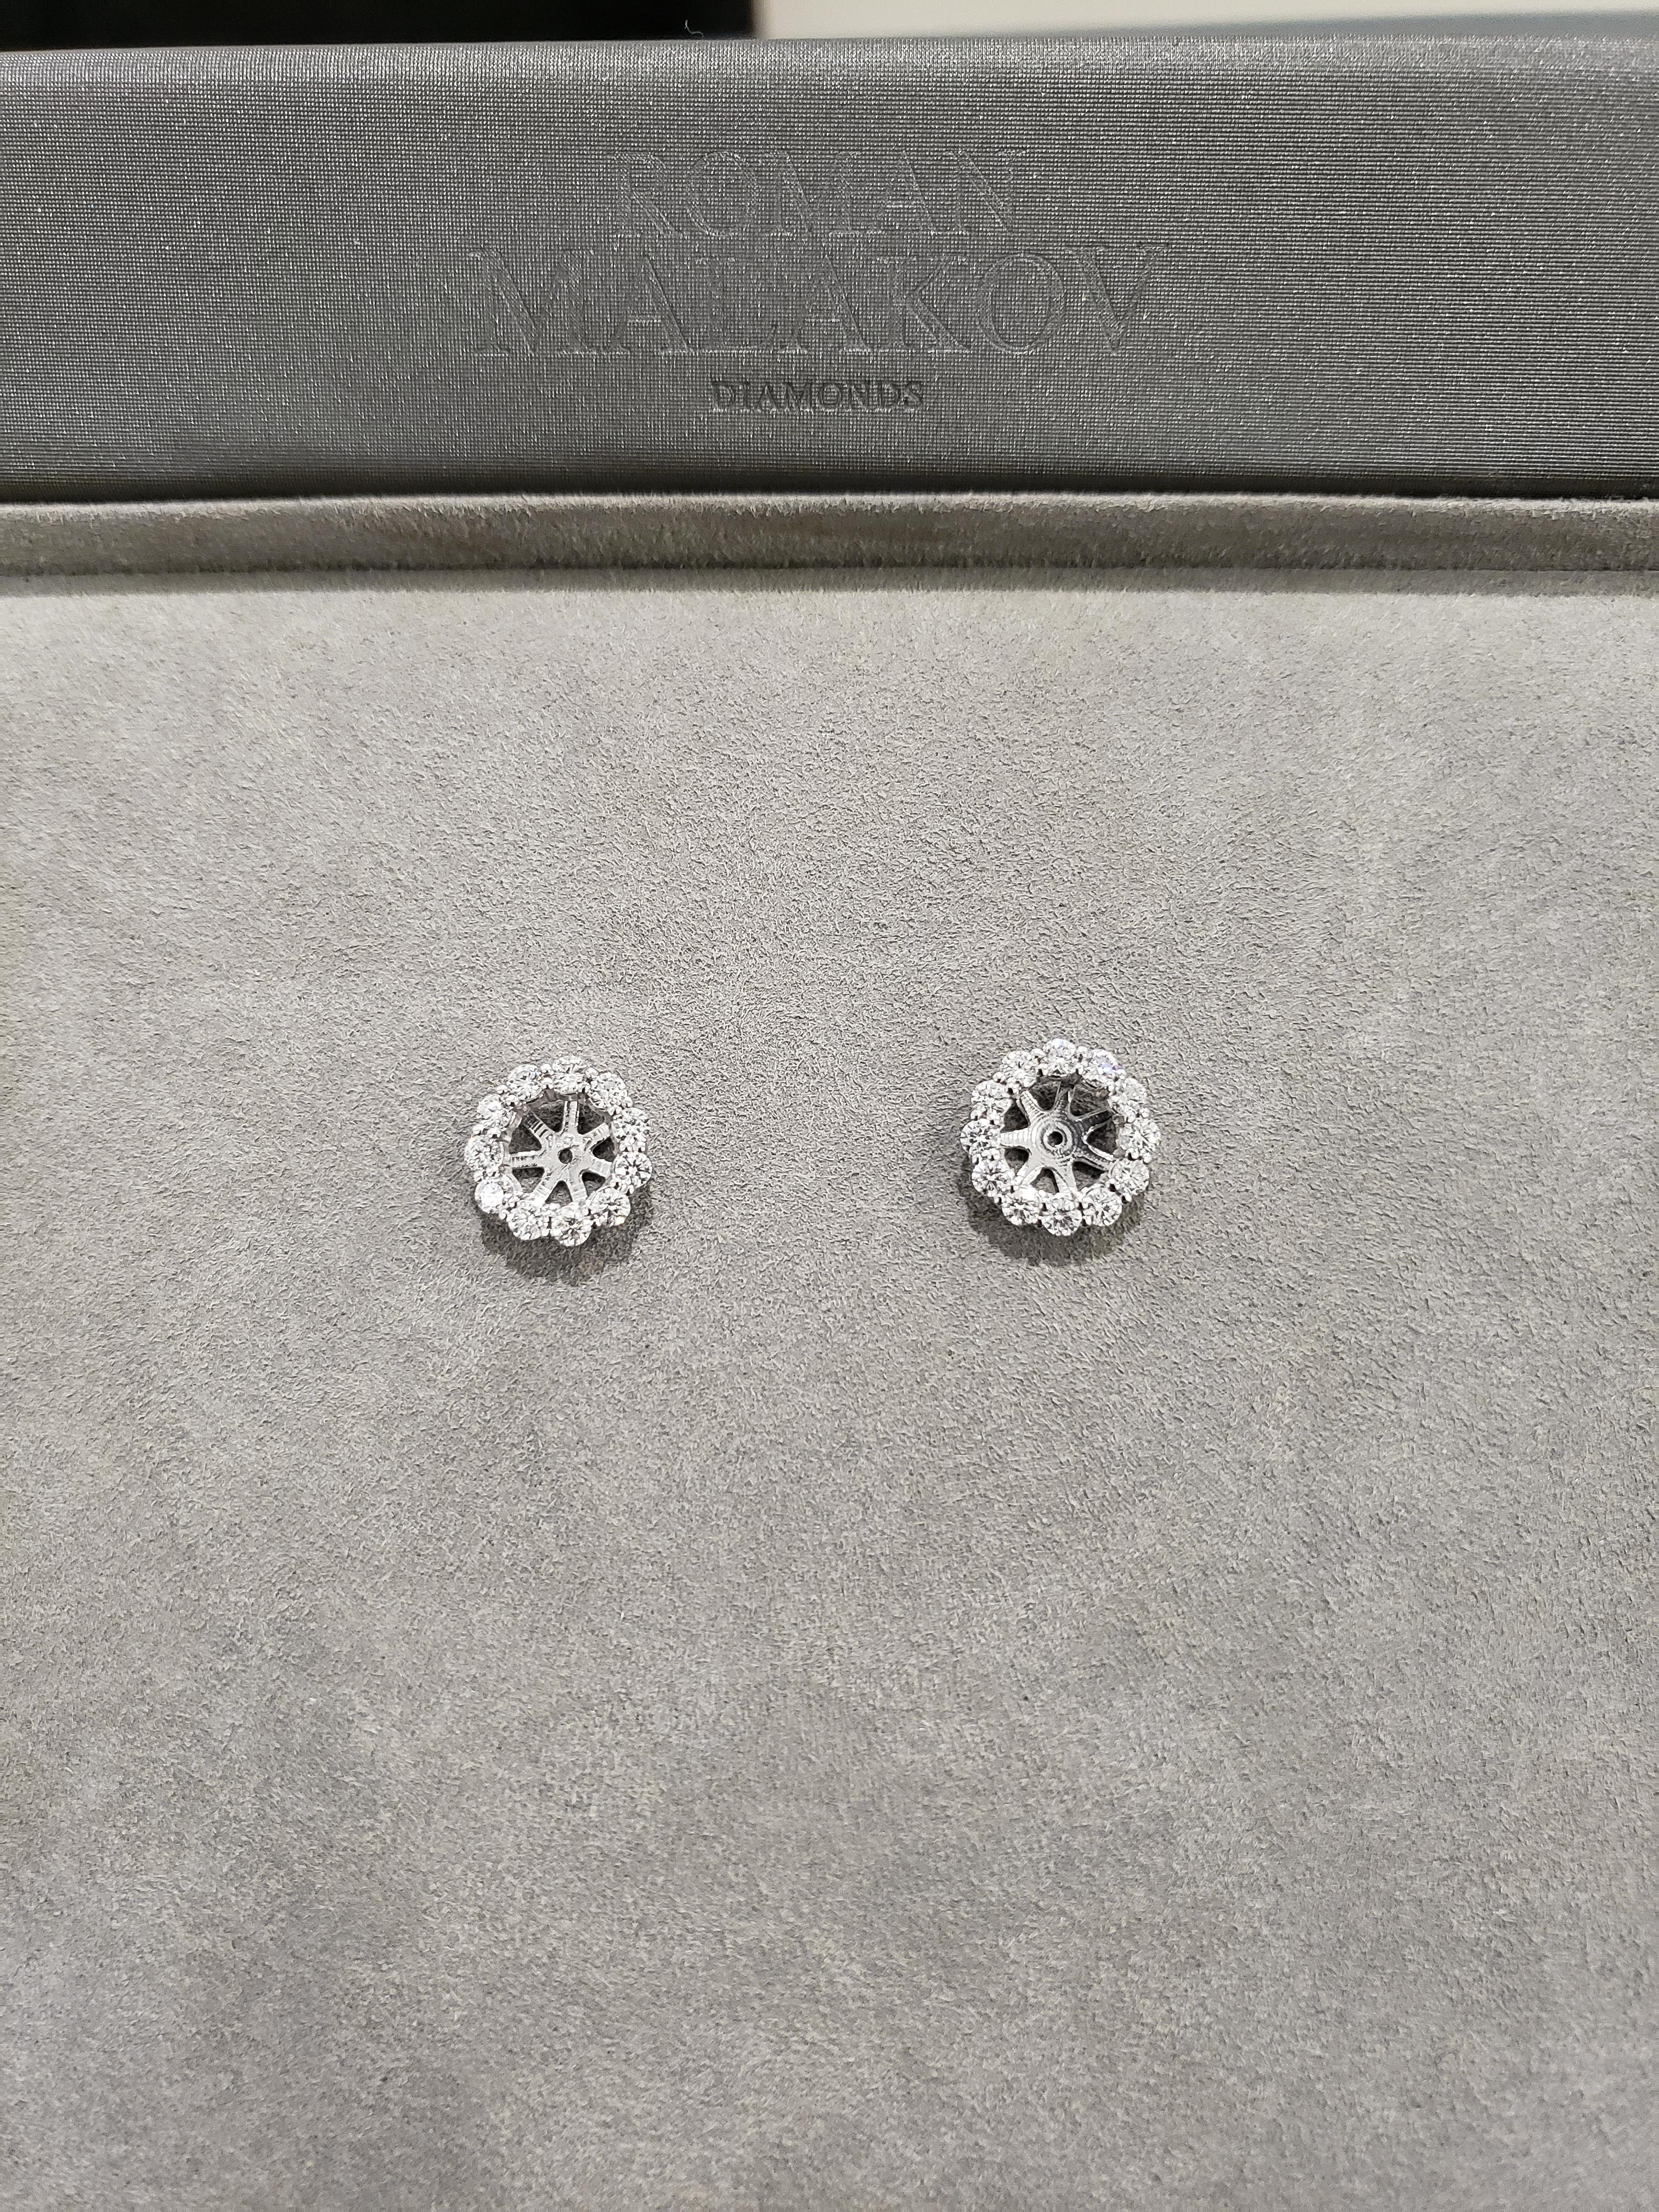 Earring jackets showcasing 1.68 carats total of round brilliant diamonds. Each jacket can be set with 1.50 - 2.00 carat diamond. Set in an 18 karat white gold mounting. 

Pictured with a 1.62 carat round diamond (sold separately).

We can make these